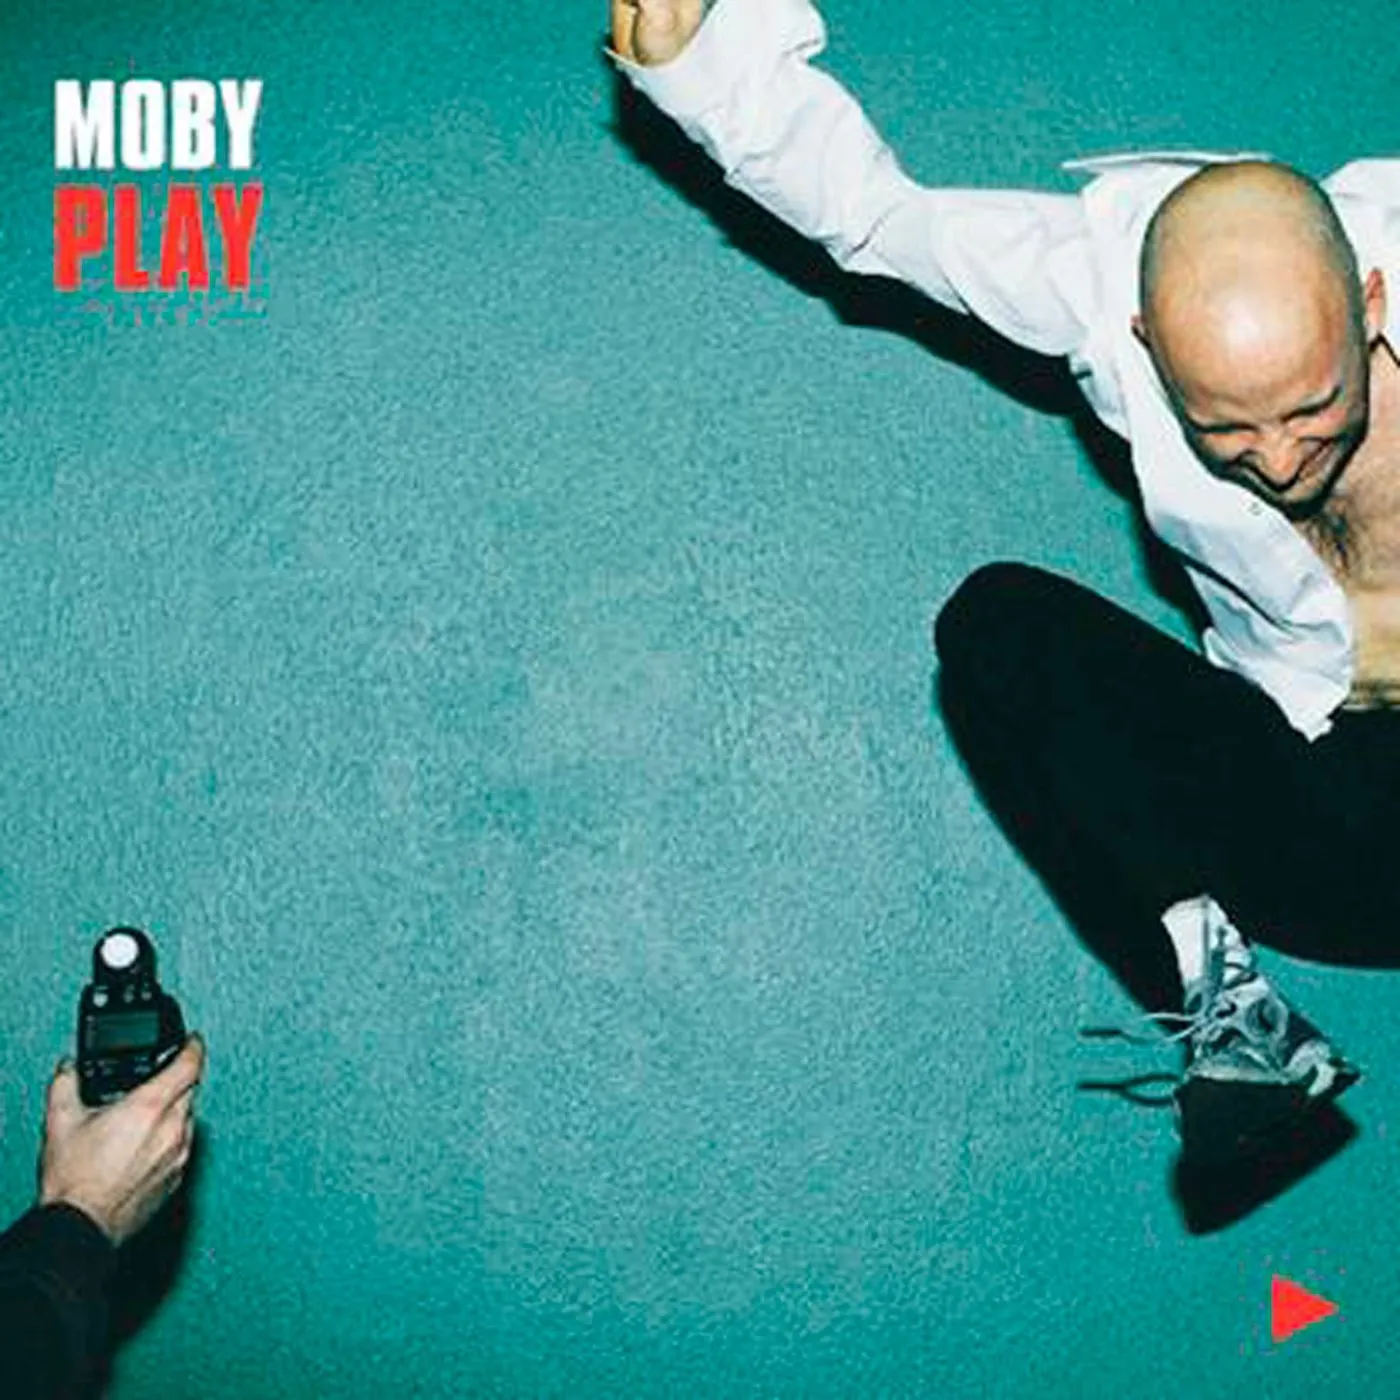 <strong>Moby - Play</strong> (Vinyl LP - black)